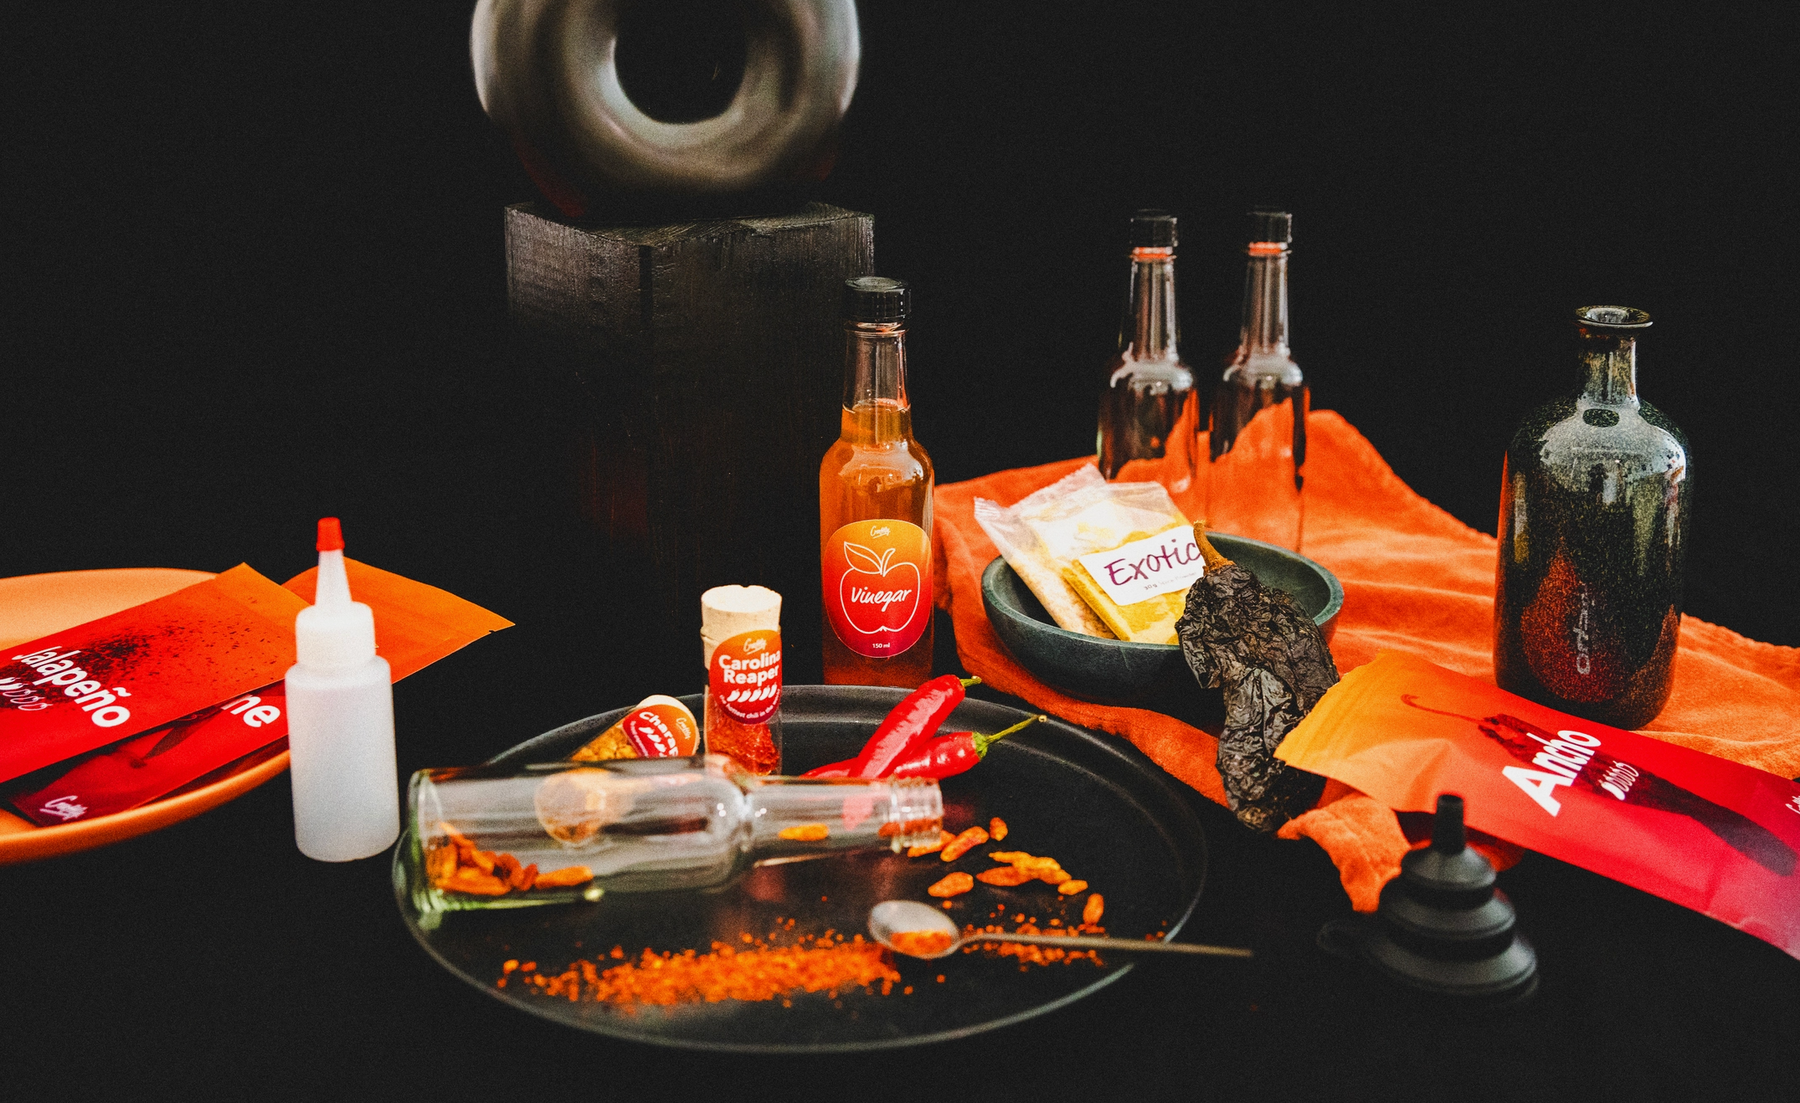 Do Your Own Hot Sauce Kit